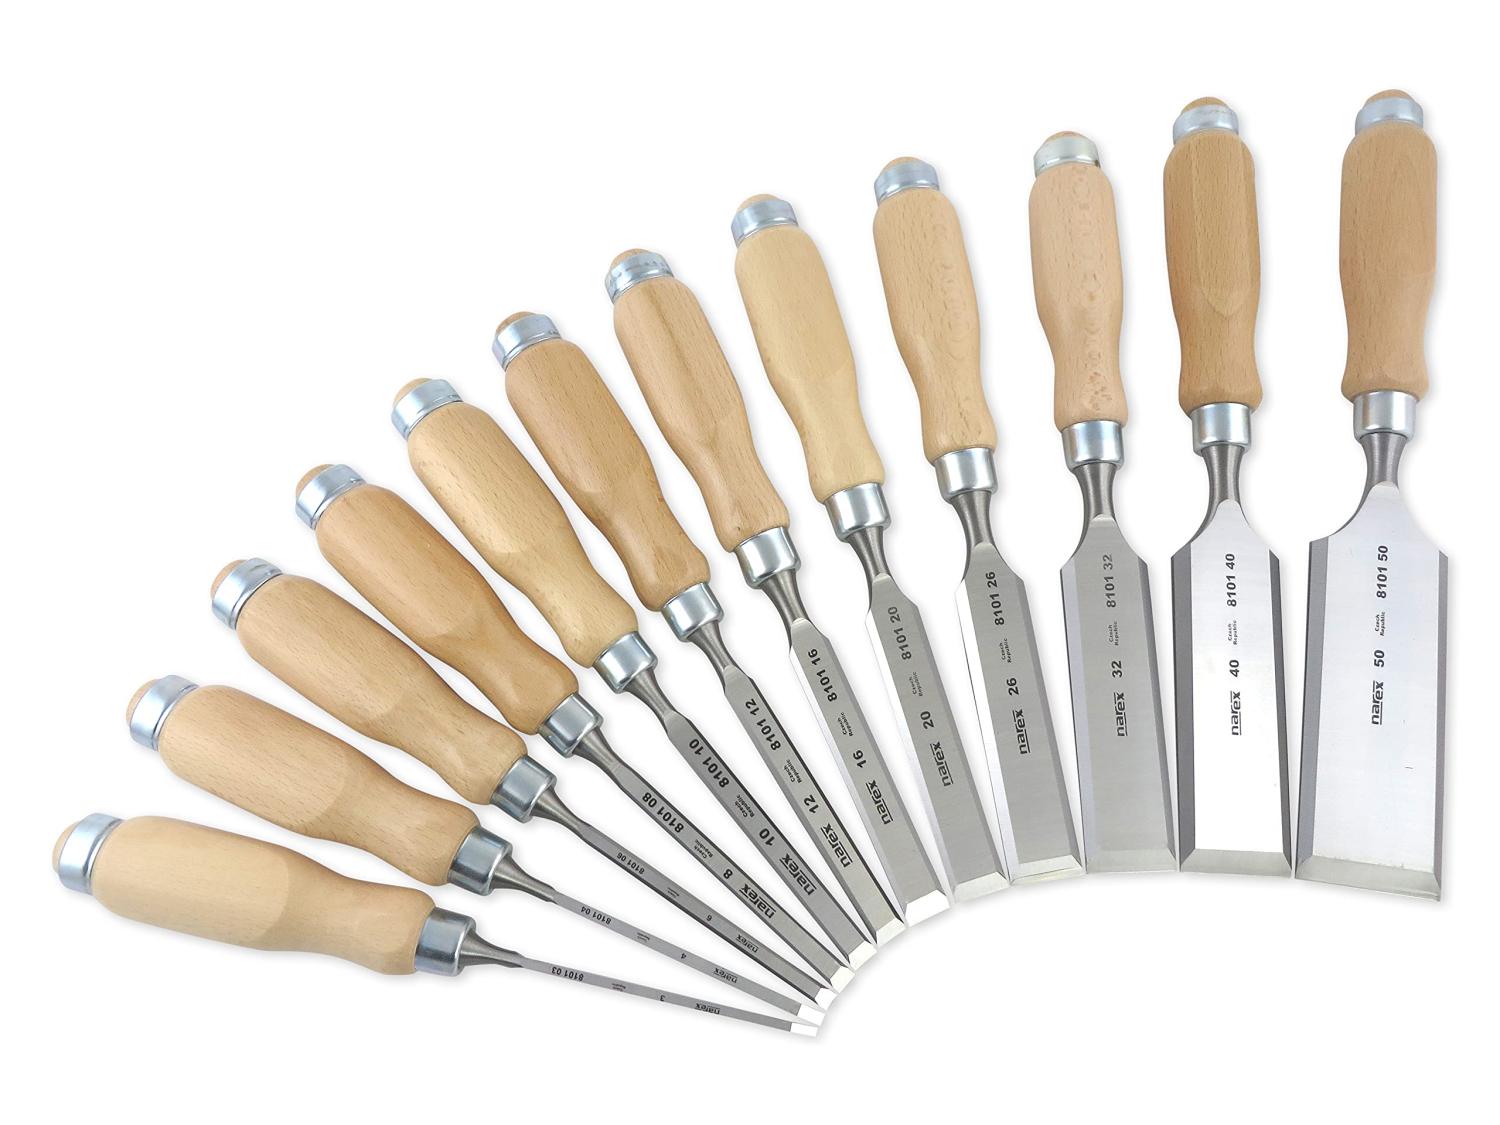 Narex Chisel Set Review - Premium Chisels, Make Your Own Handles!